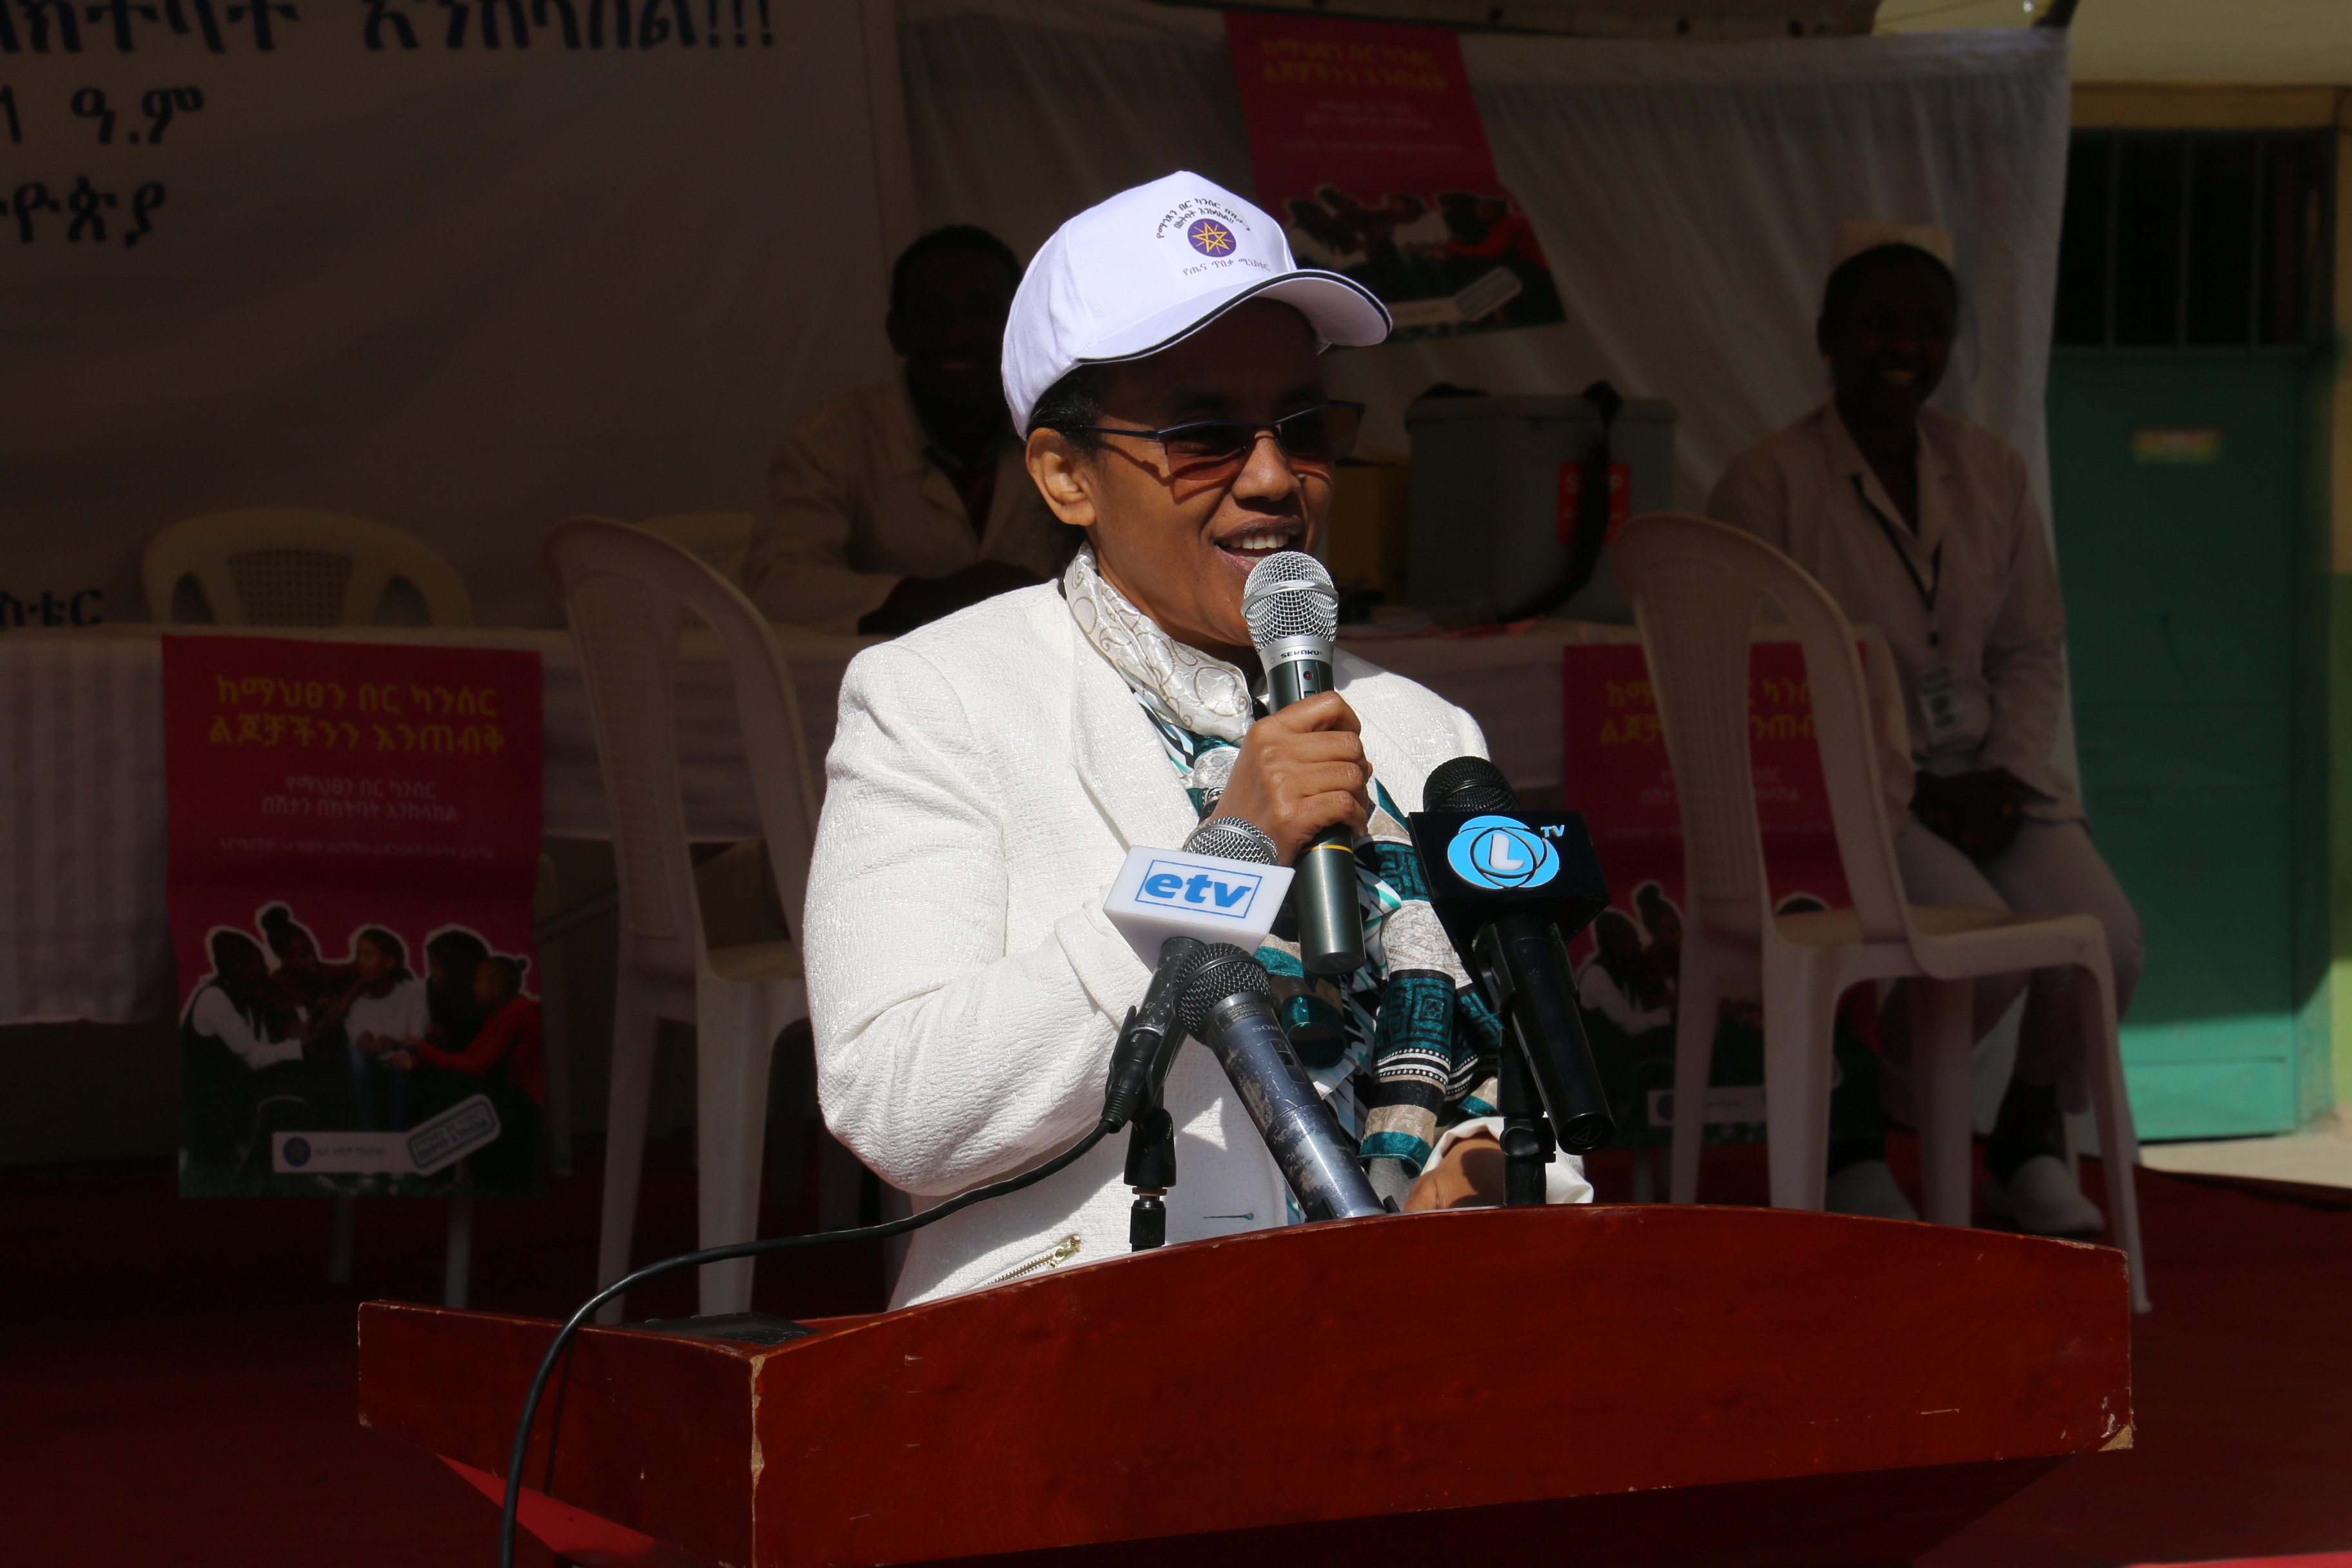 Former first lady, Mrs Roman Tesfaye, delivering a speech